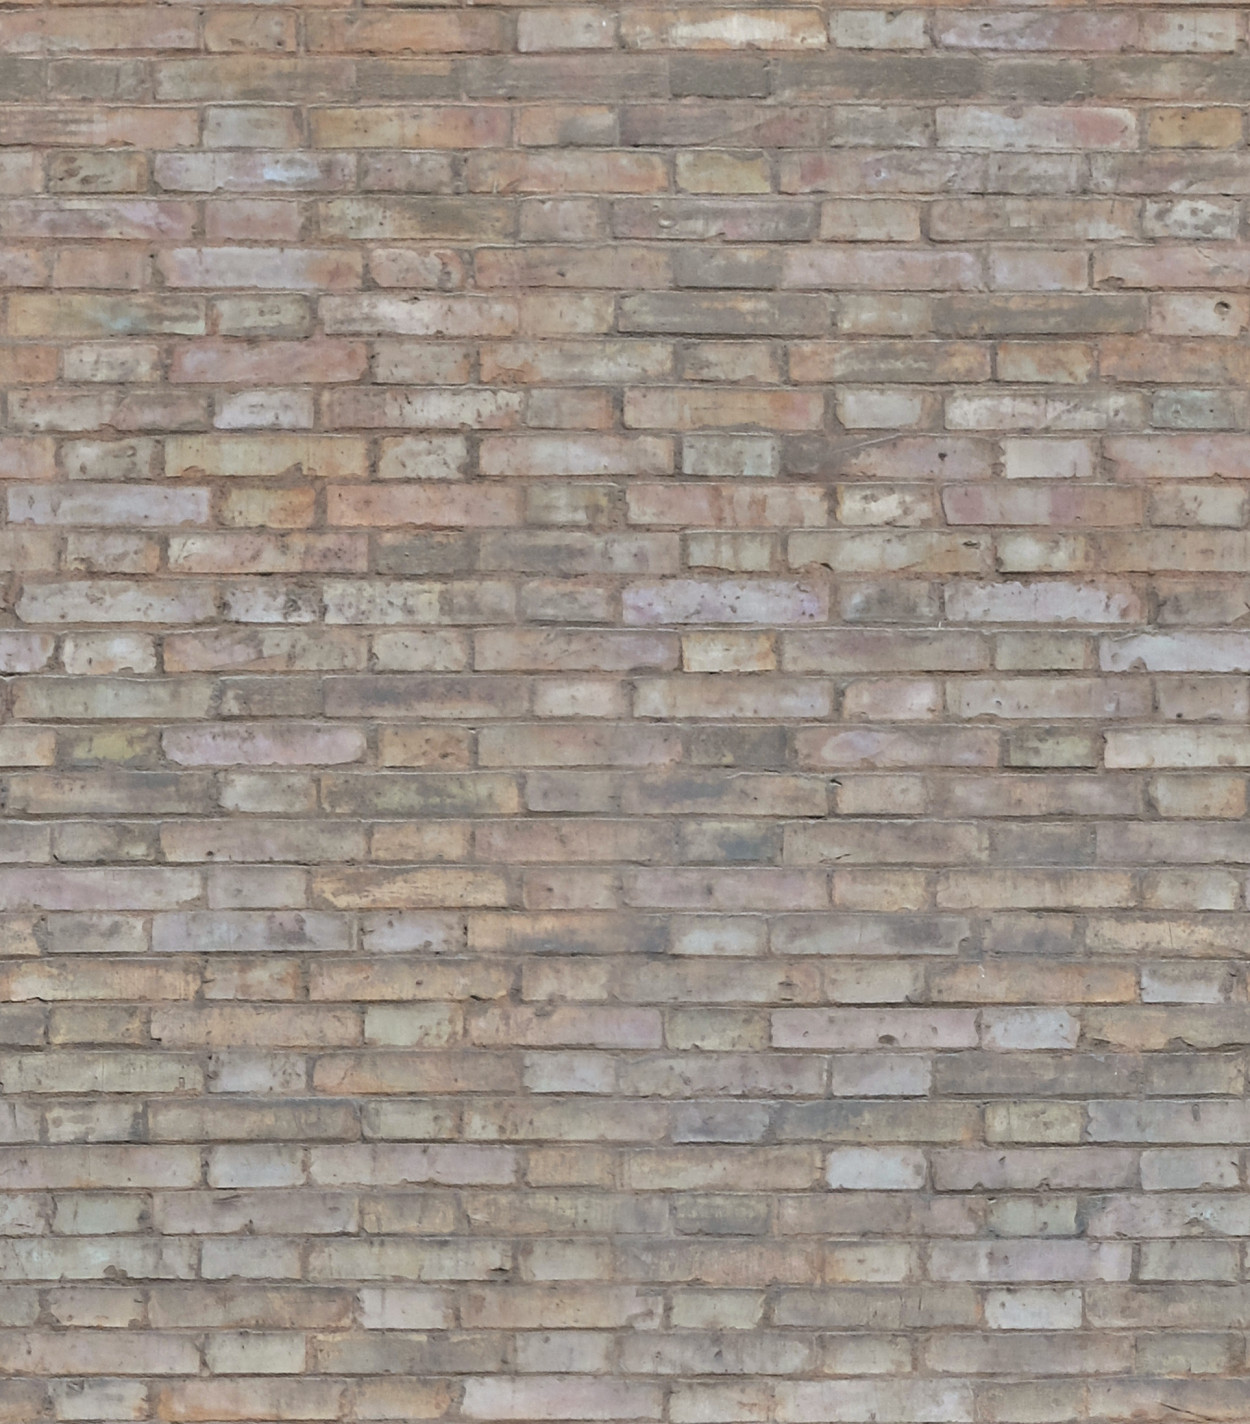 A seamless brown bricks texture for use in architectural drawings and 3D models